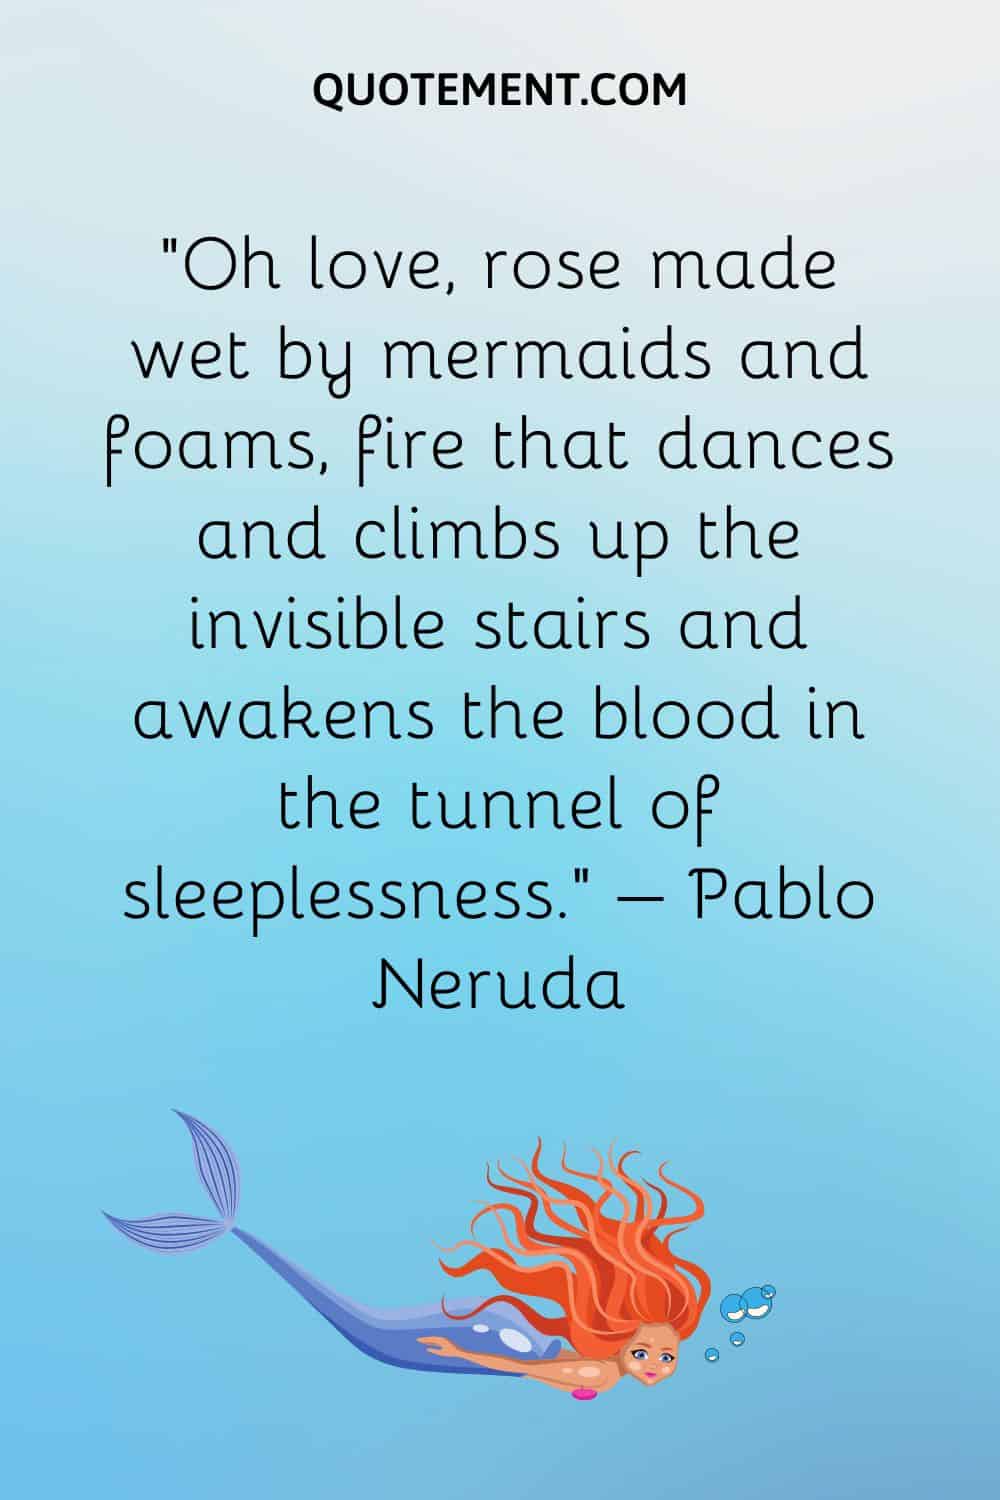 “Oh love, rose made wet by mermaids and foams, fire that dances and climbs up the invisible stairs and awakens the blood in the tunnel of sleeplessness.” – Pablo Neruda